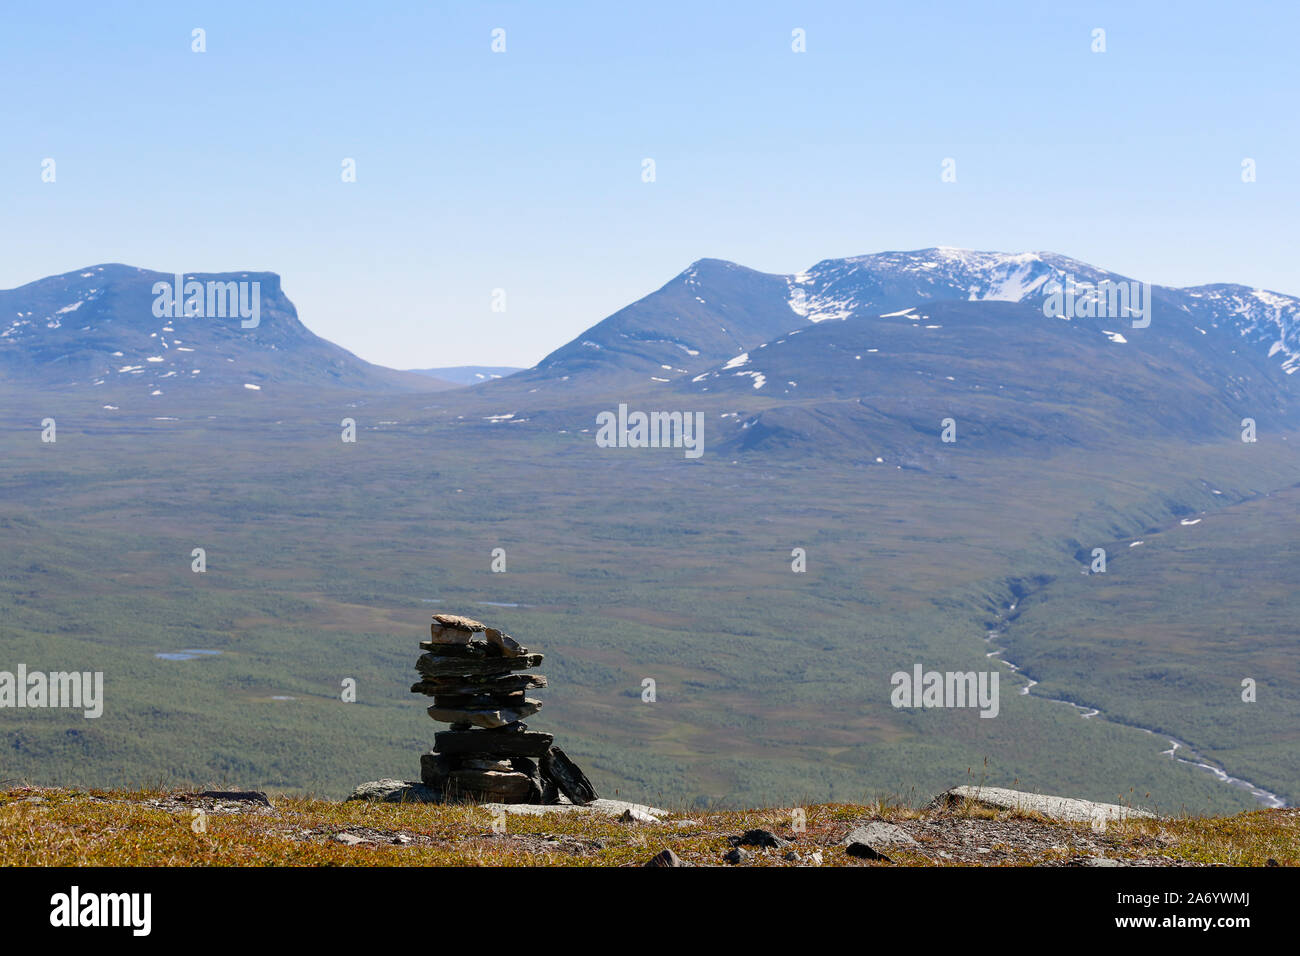 View towards the U-shaped mountain Tjuonavagge with a small mound of stones in the foreground. Arctic region of Sweden. Stock Photo